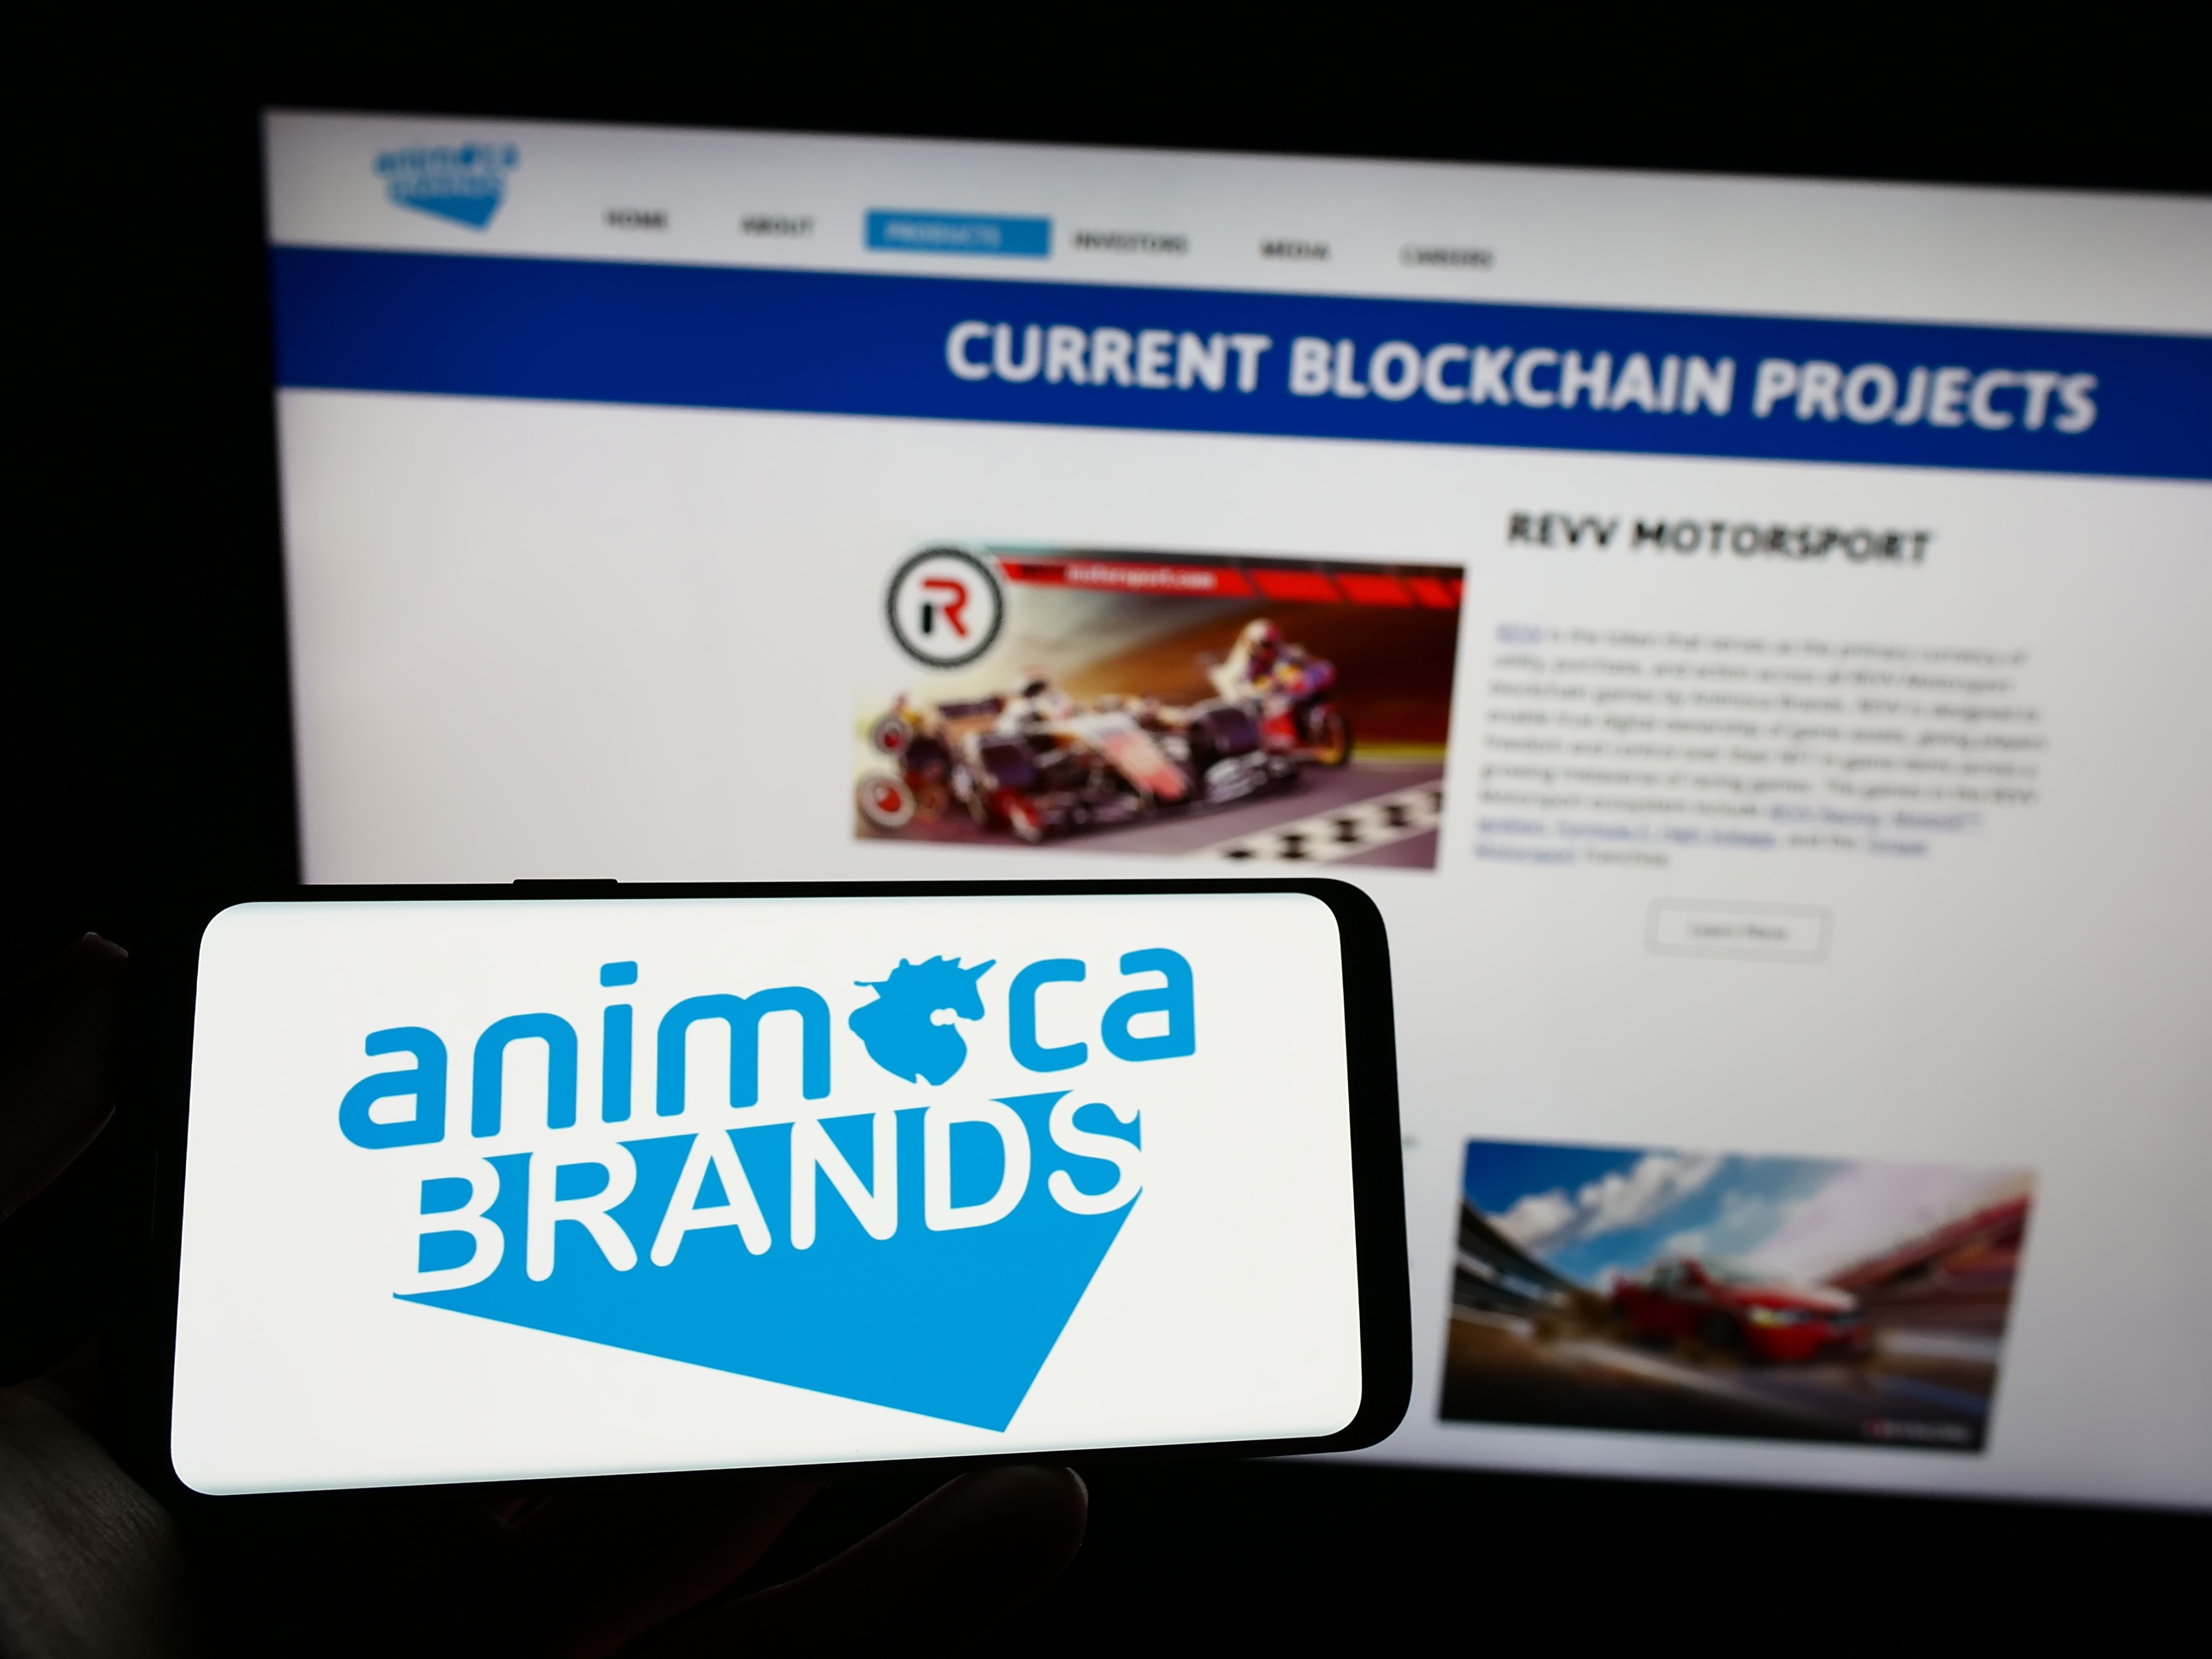 Animoca Brands, already a major player in the Web3 space with investments in more than 400 start-ups, is looking to expand its footprint. Photo: Shutterstock